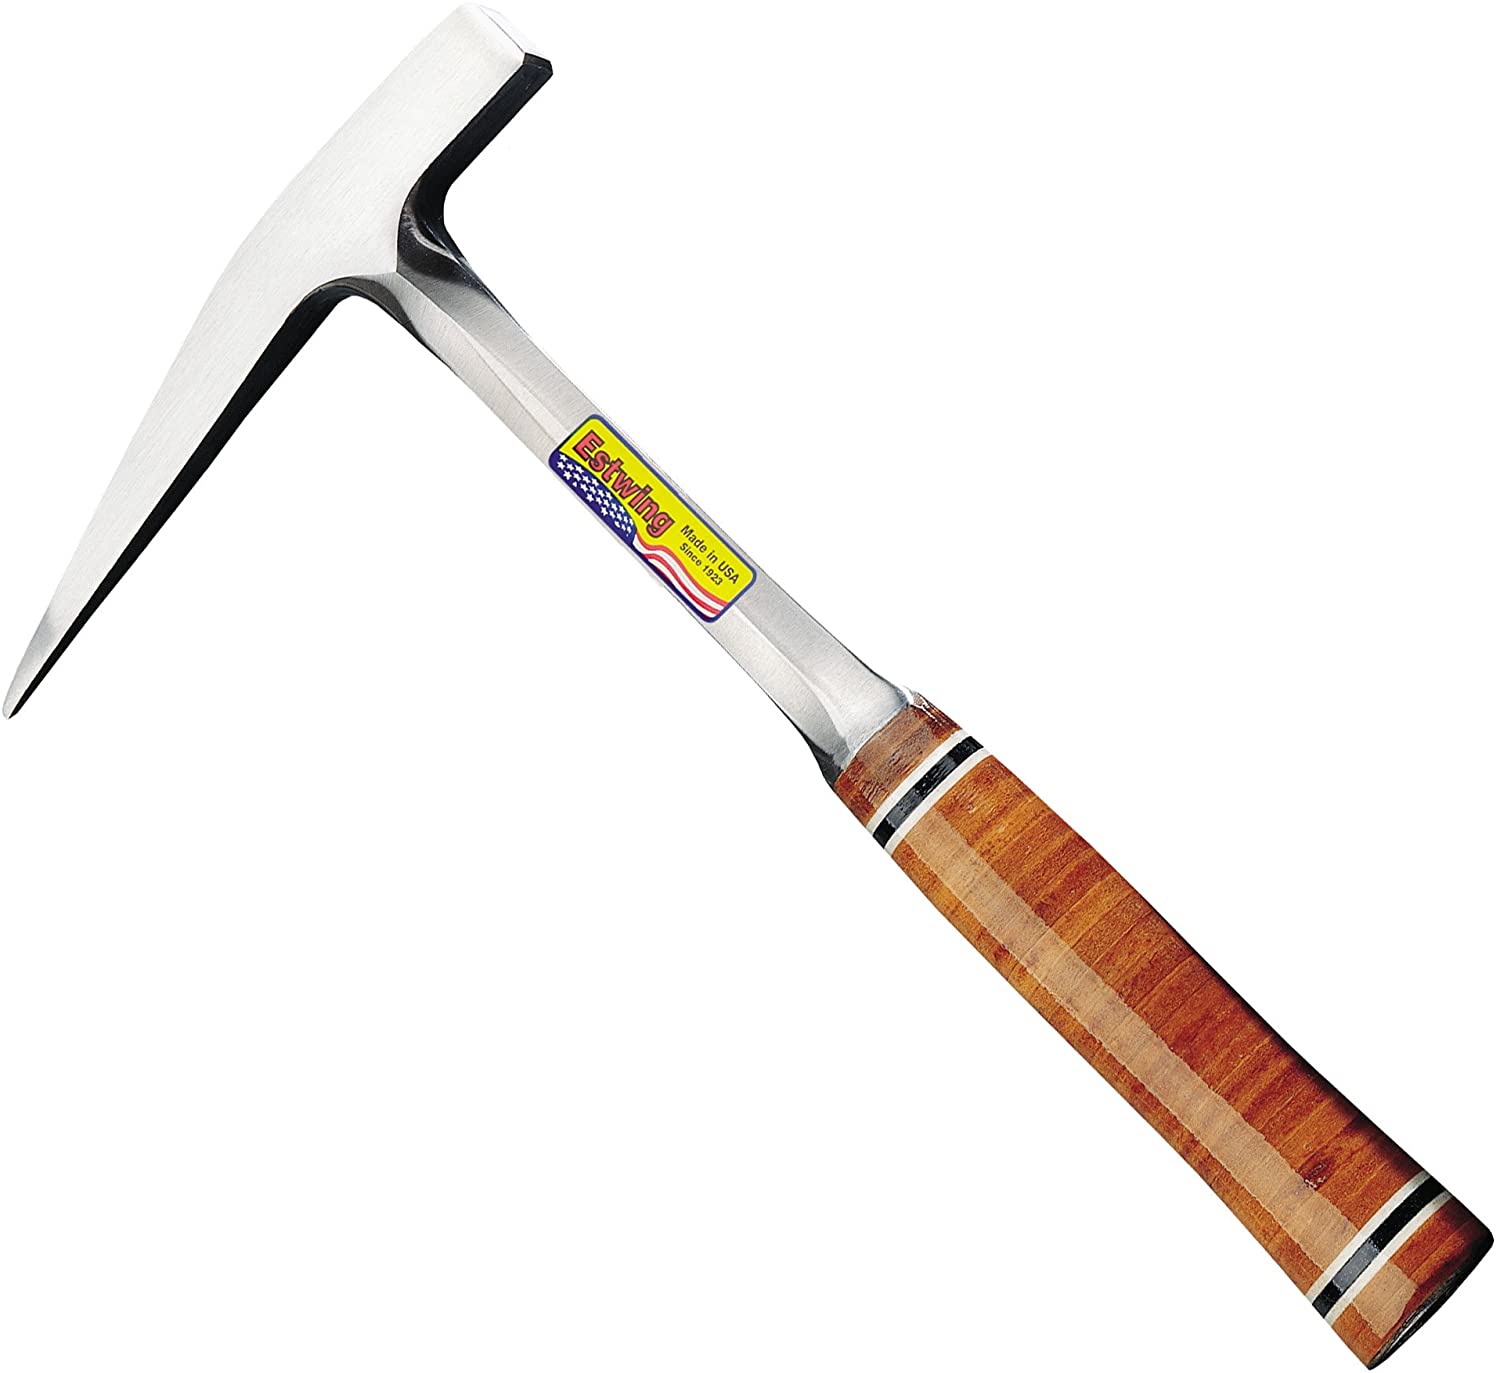 Estwing Rock Pick - 13 oz Geological Hammer with